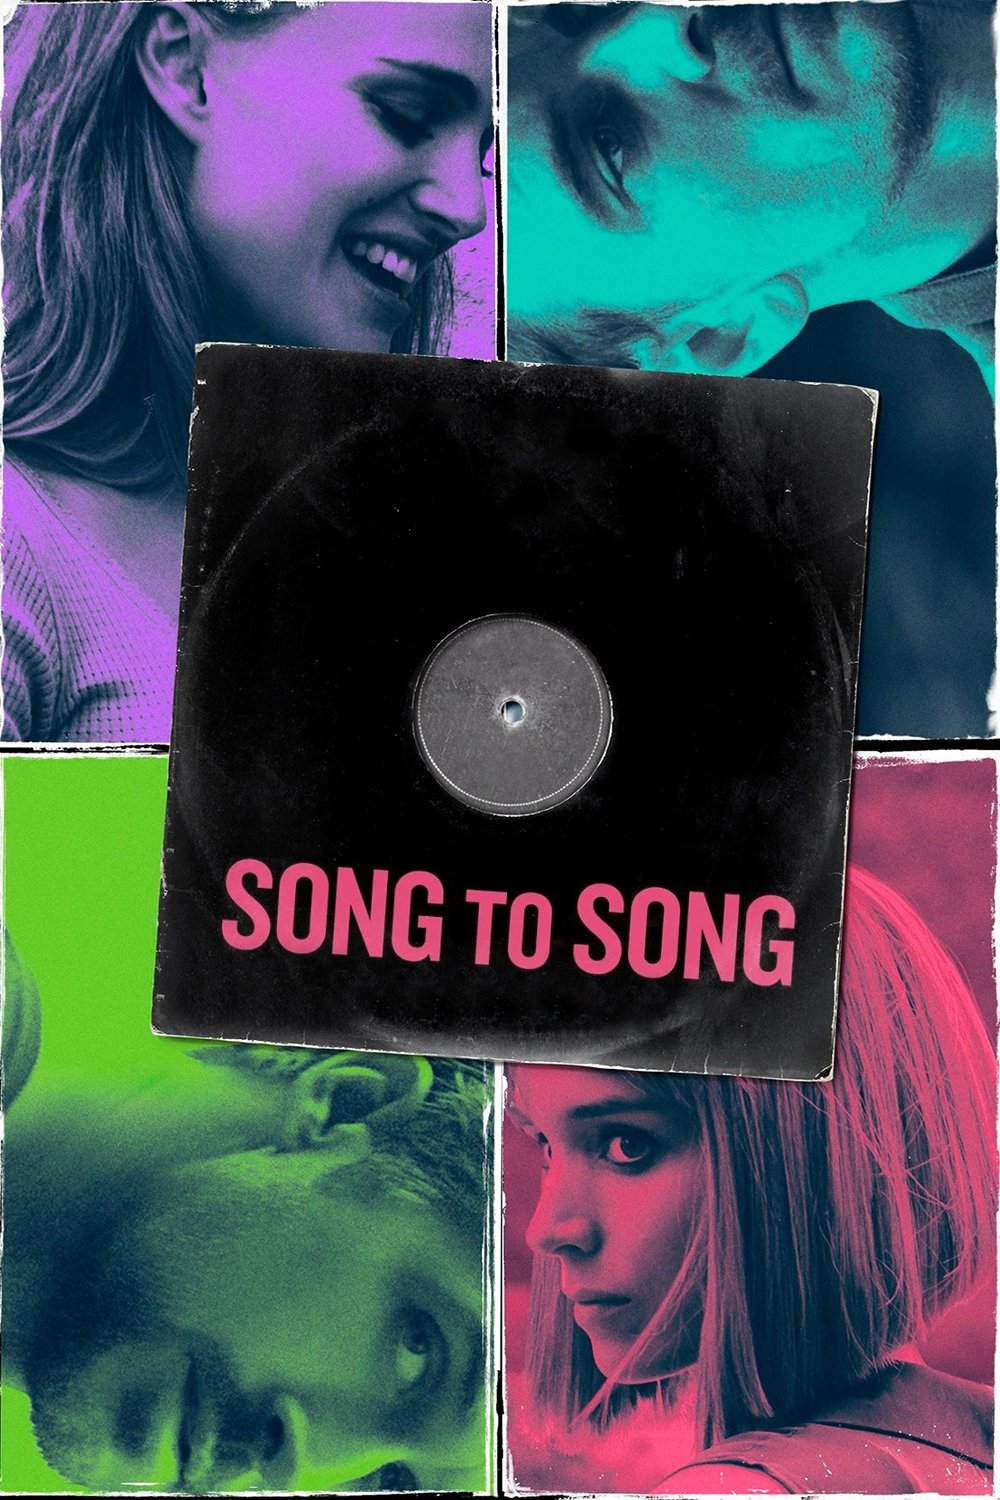 Plakat von "Song to Song"